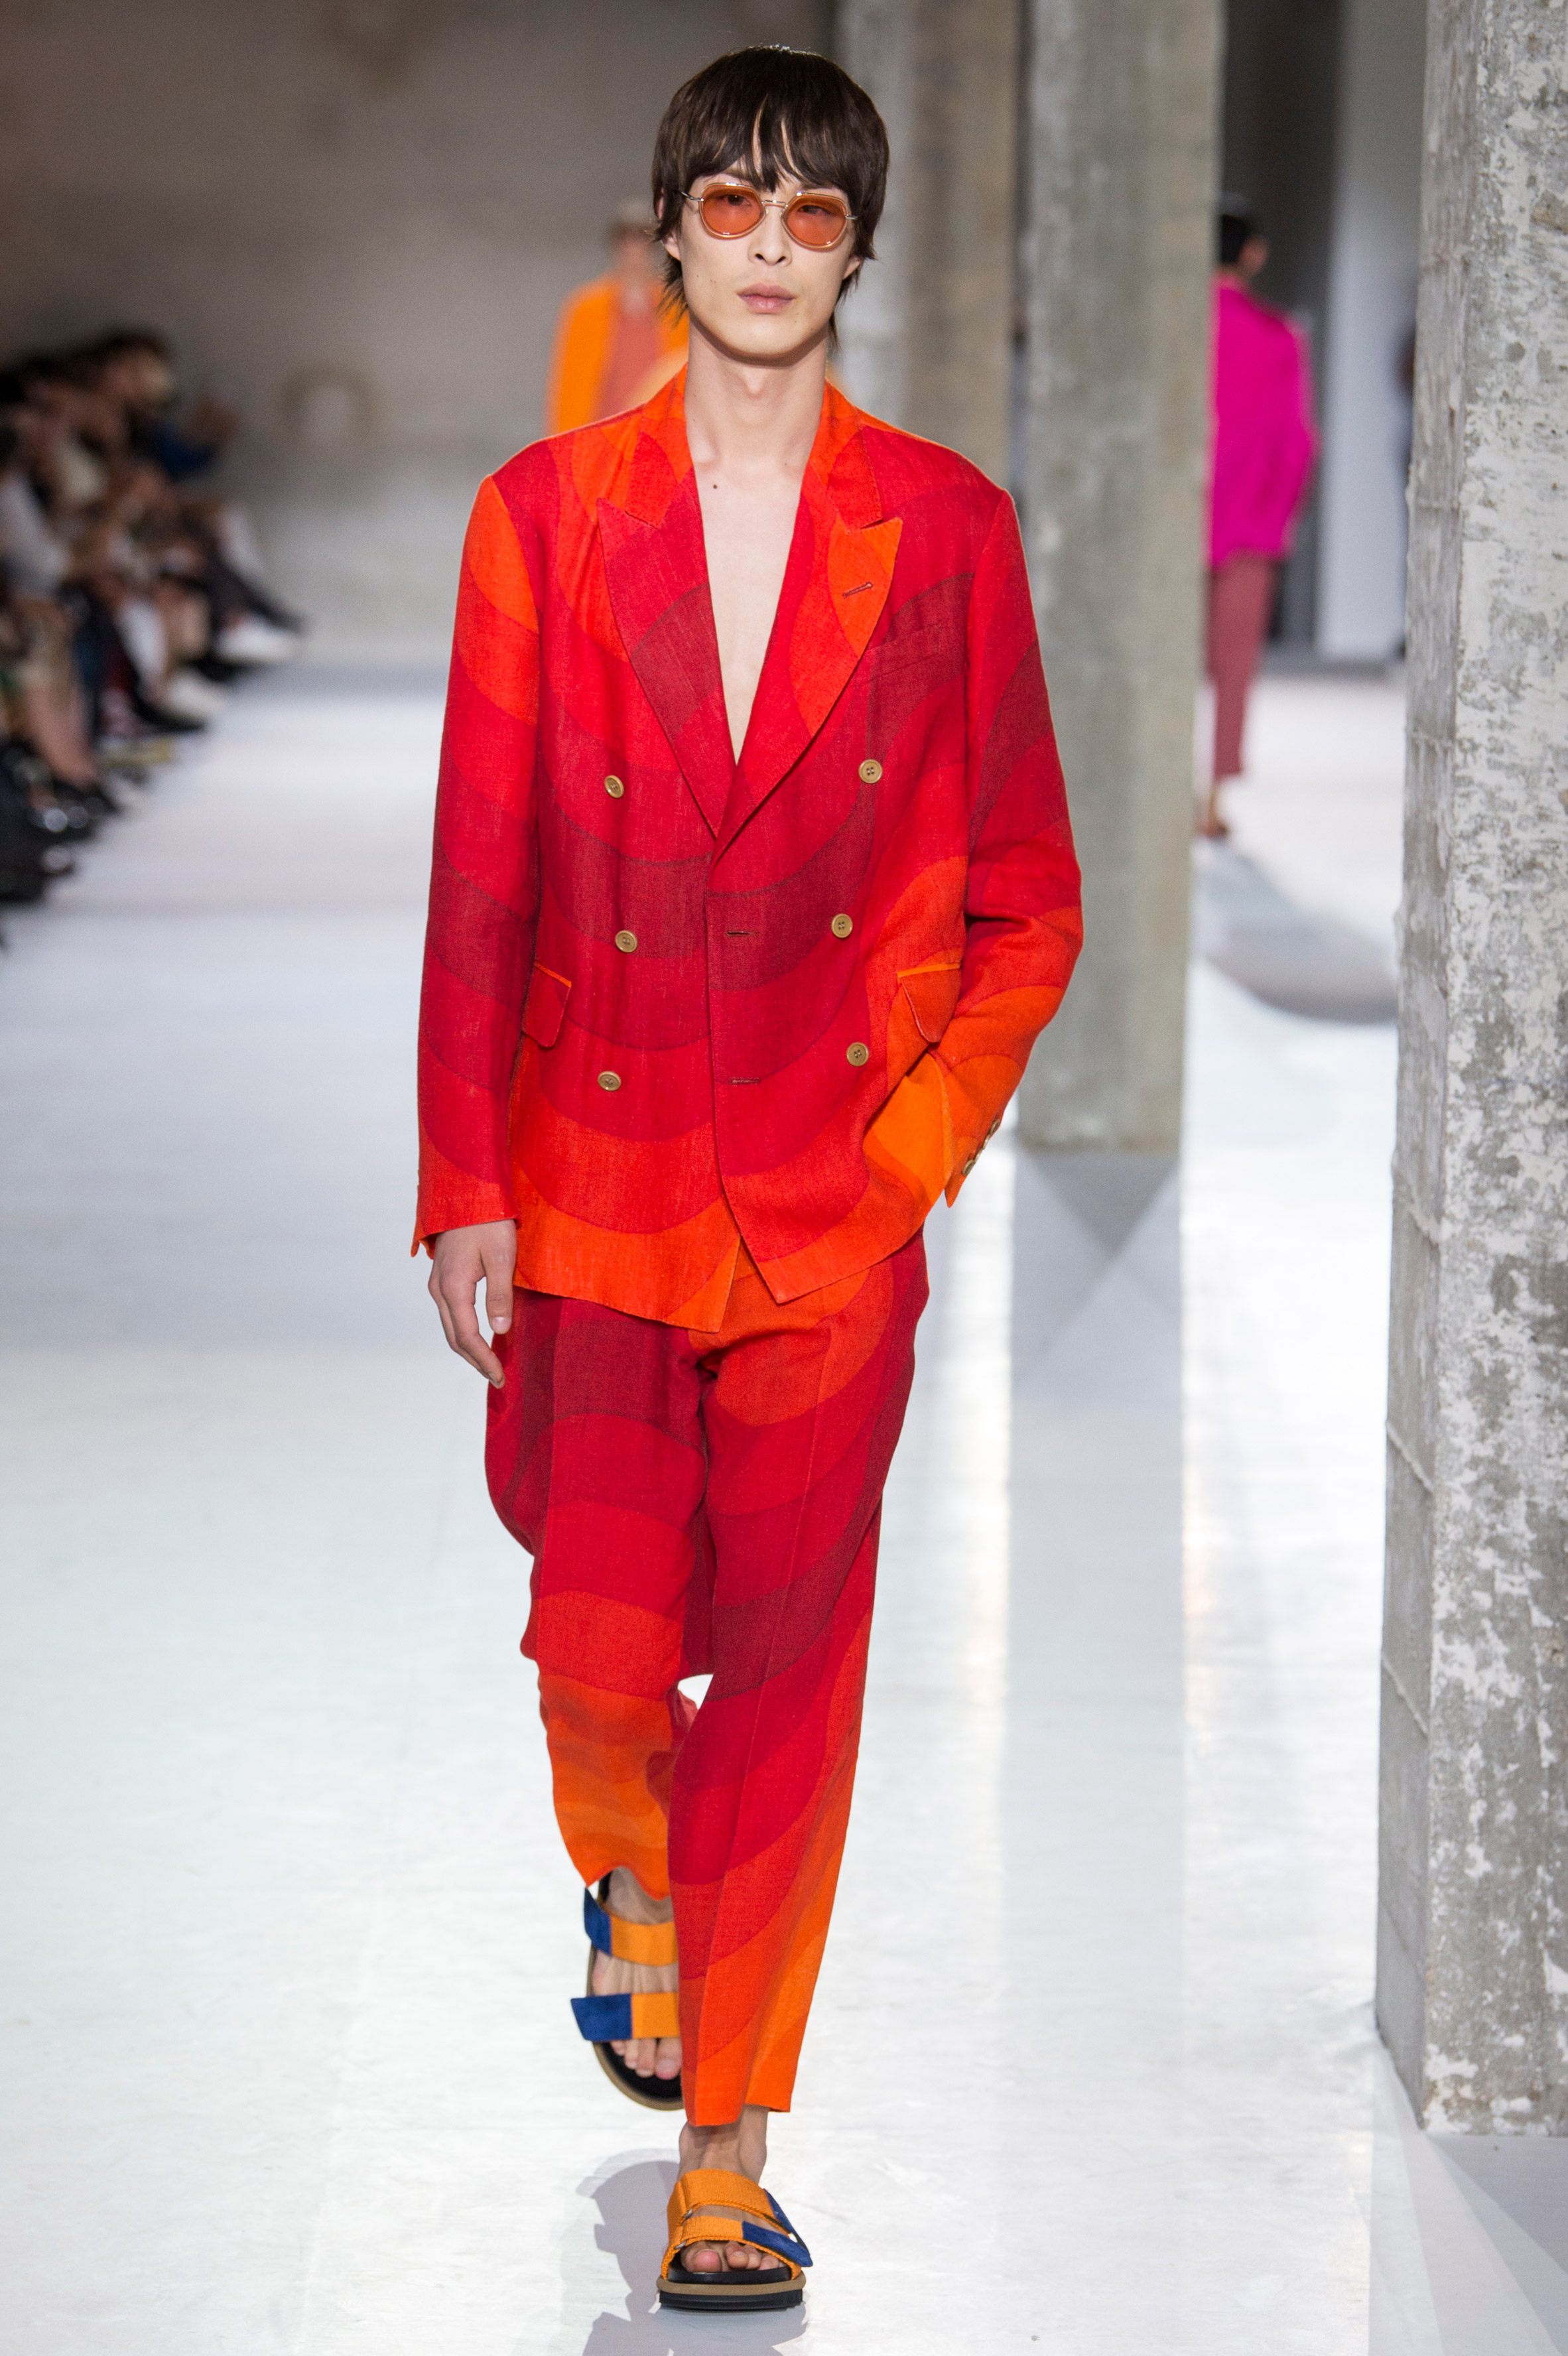 Dries Van Noten pays homage to Verner Panton with colourful